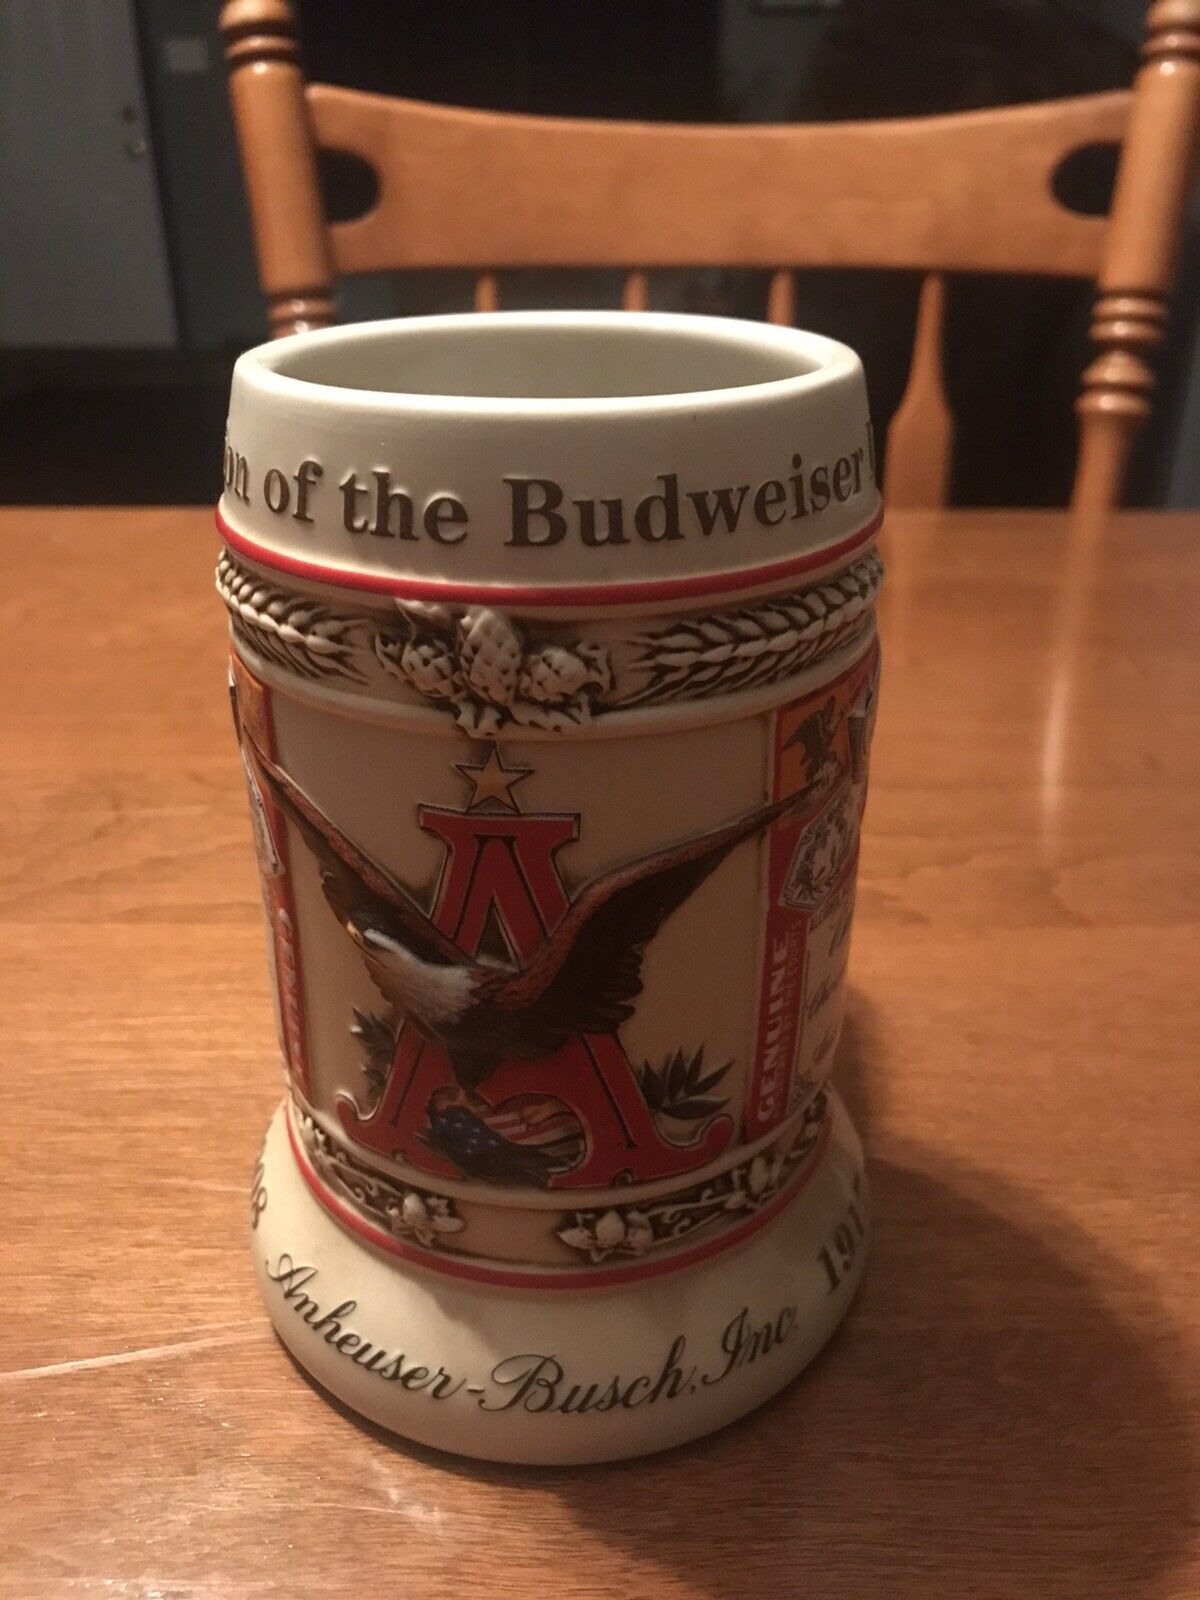 Budweiser Evolution of the Label - 1999 State Convention Beer Mug Stein